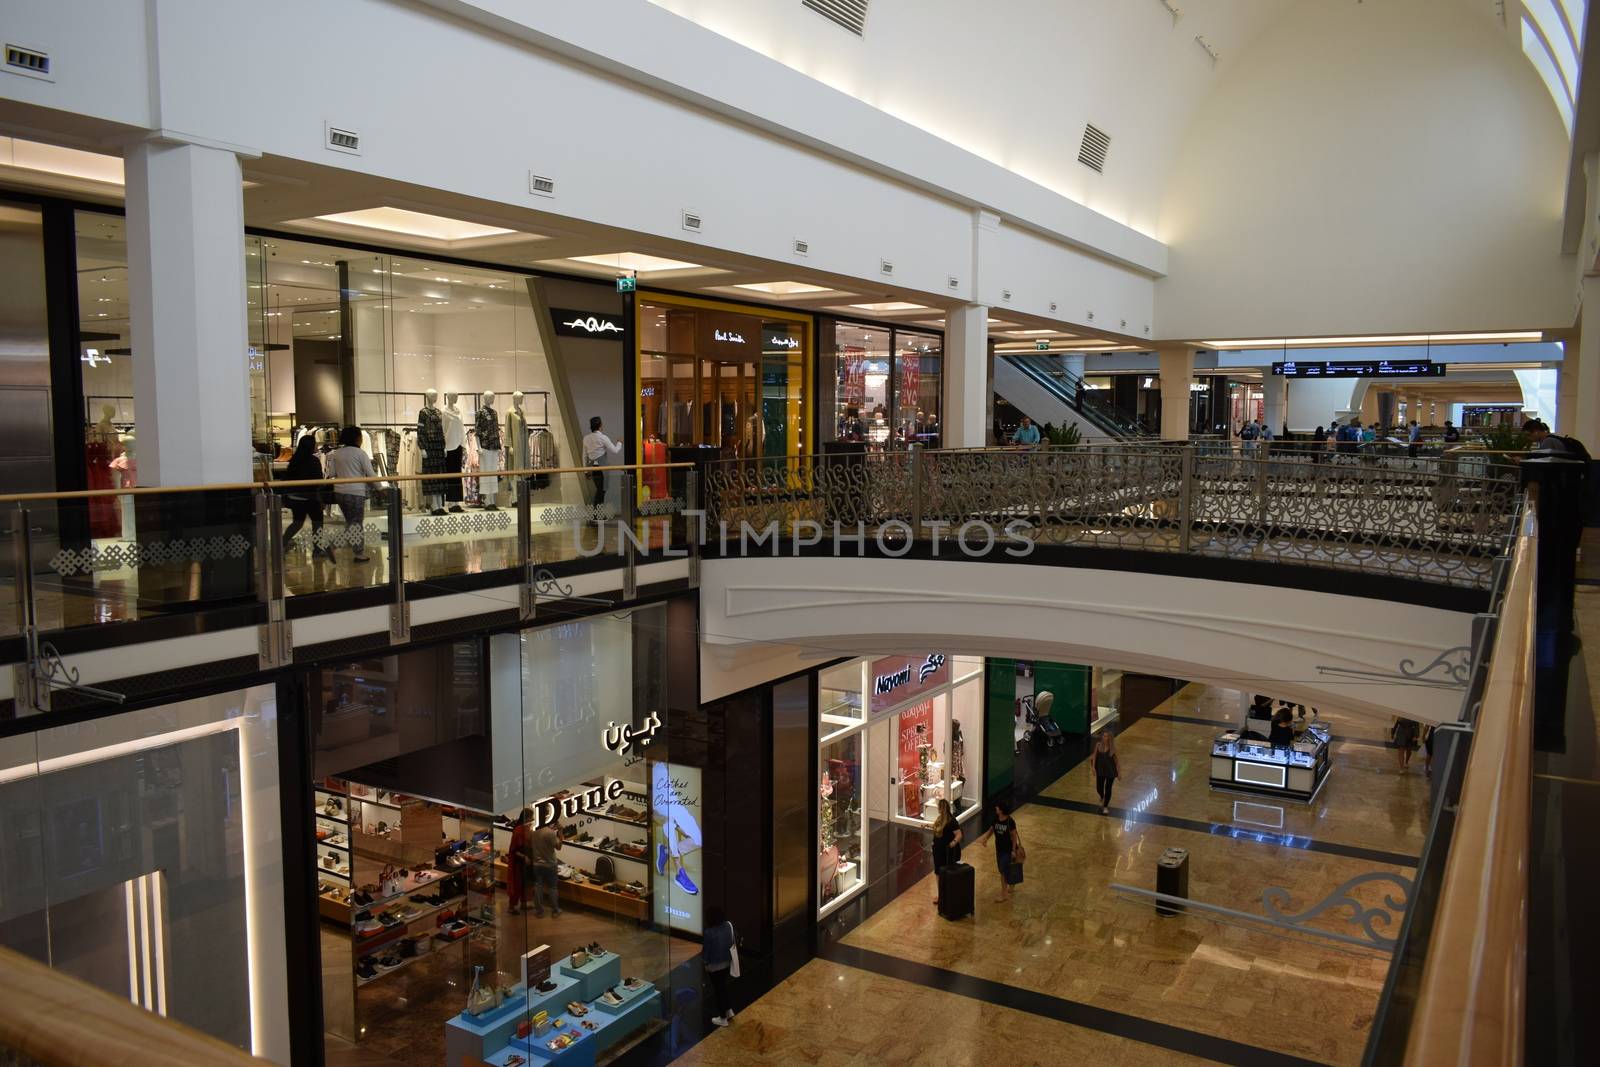 Dubai, United Arab Emirates - February 9, 2019 - Internal view of the Mall of the Emirates shopping center that hosts the Ski Dubai attraction